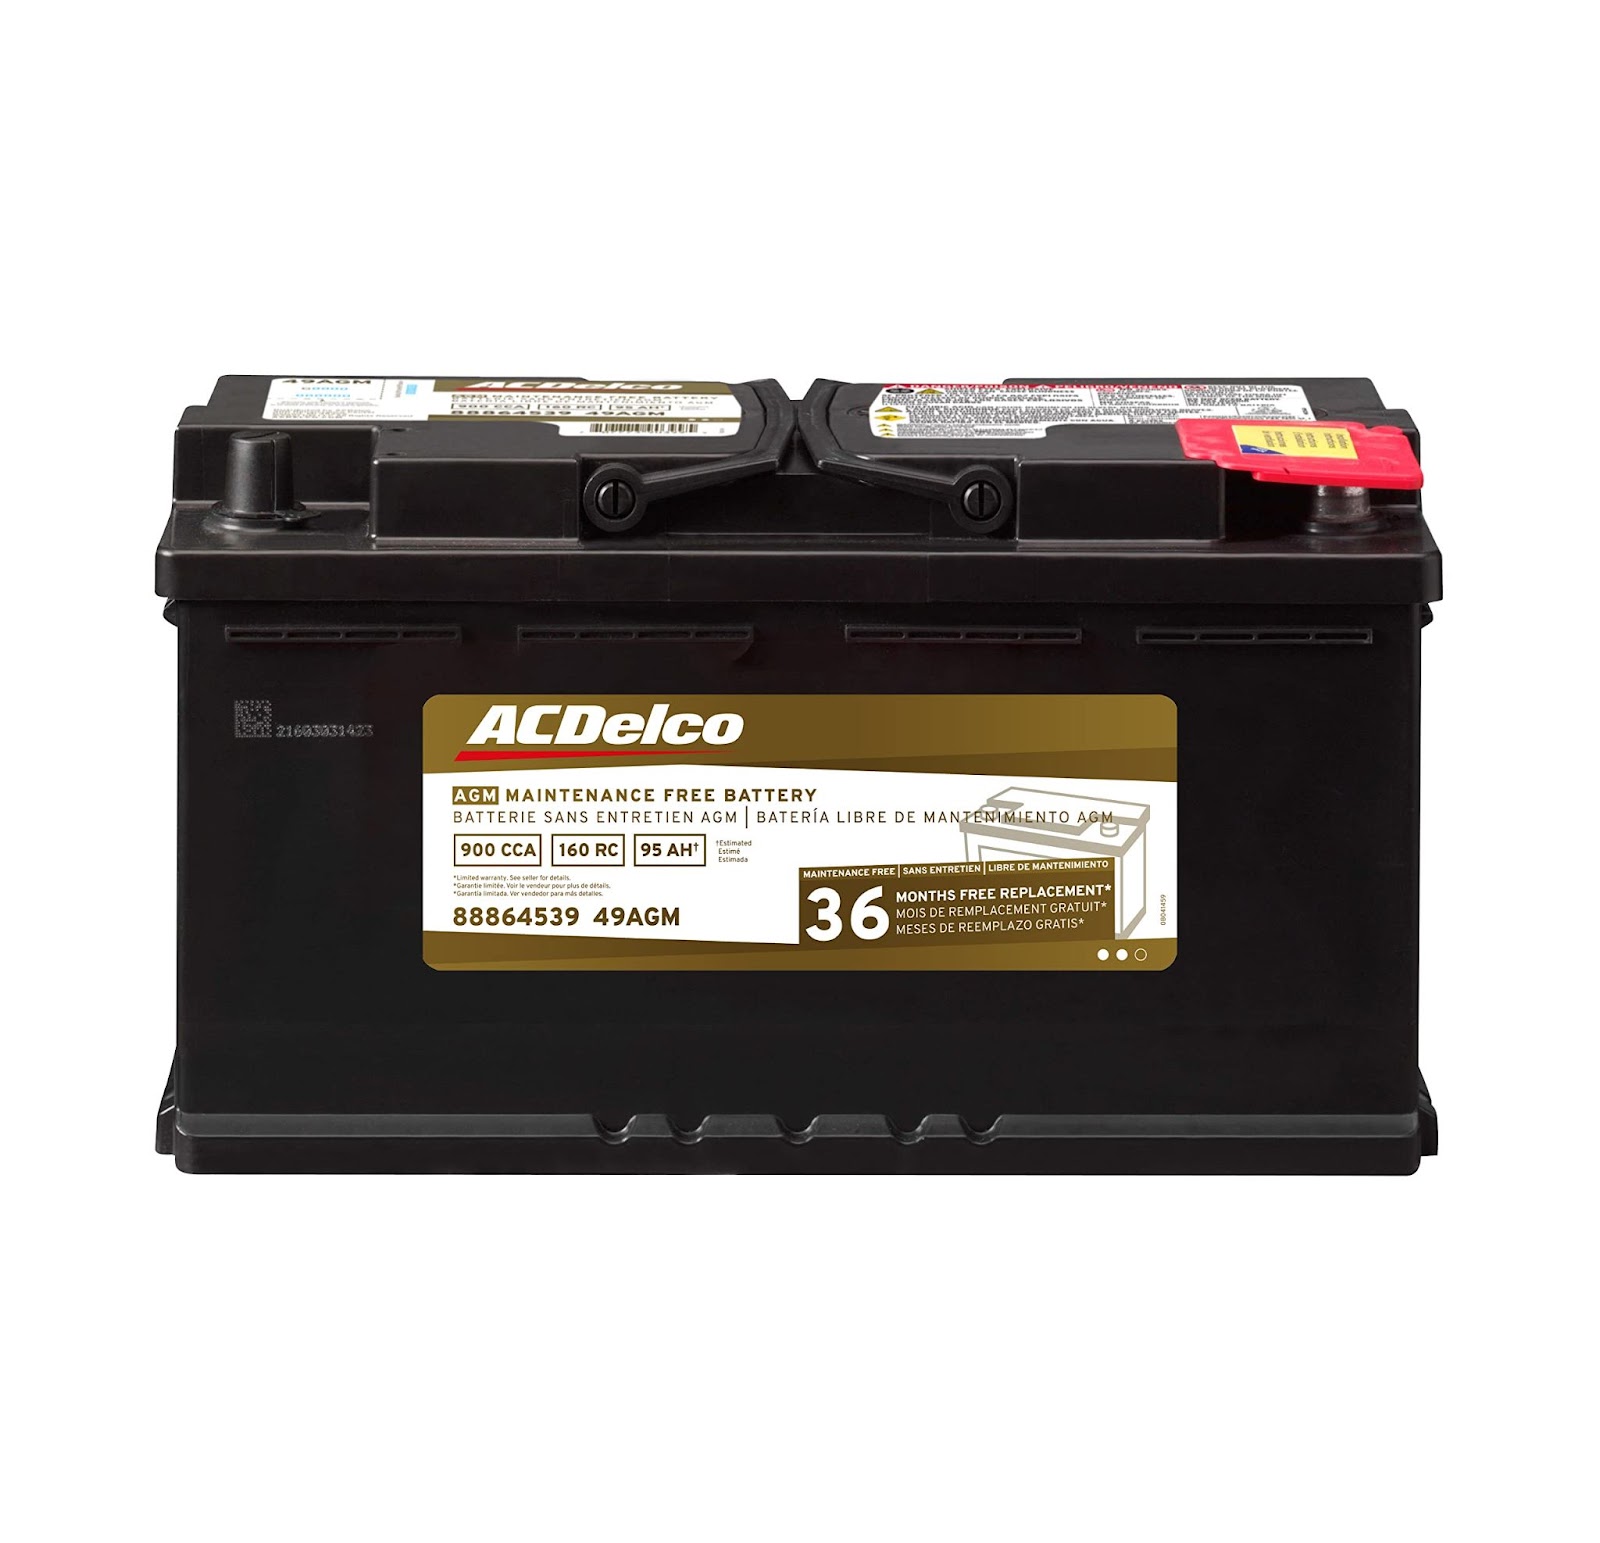 ACDelco Gold 49AGM AGM BCI Group 49 Battery Price